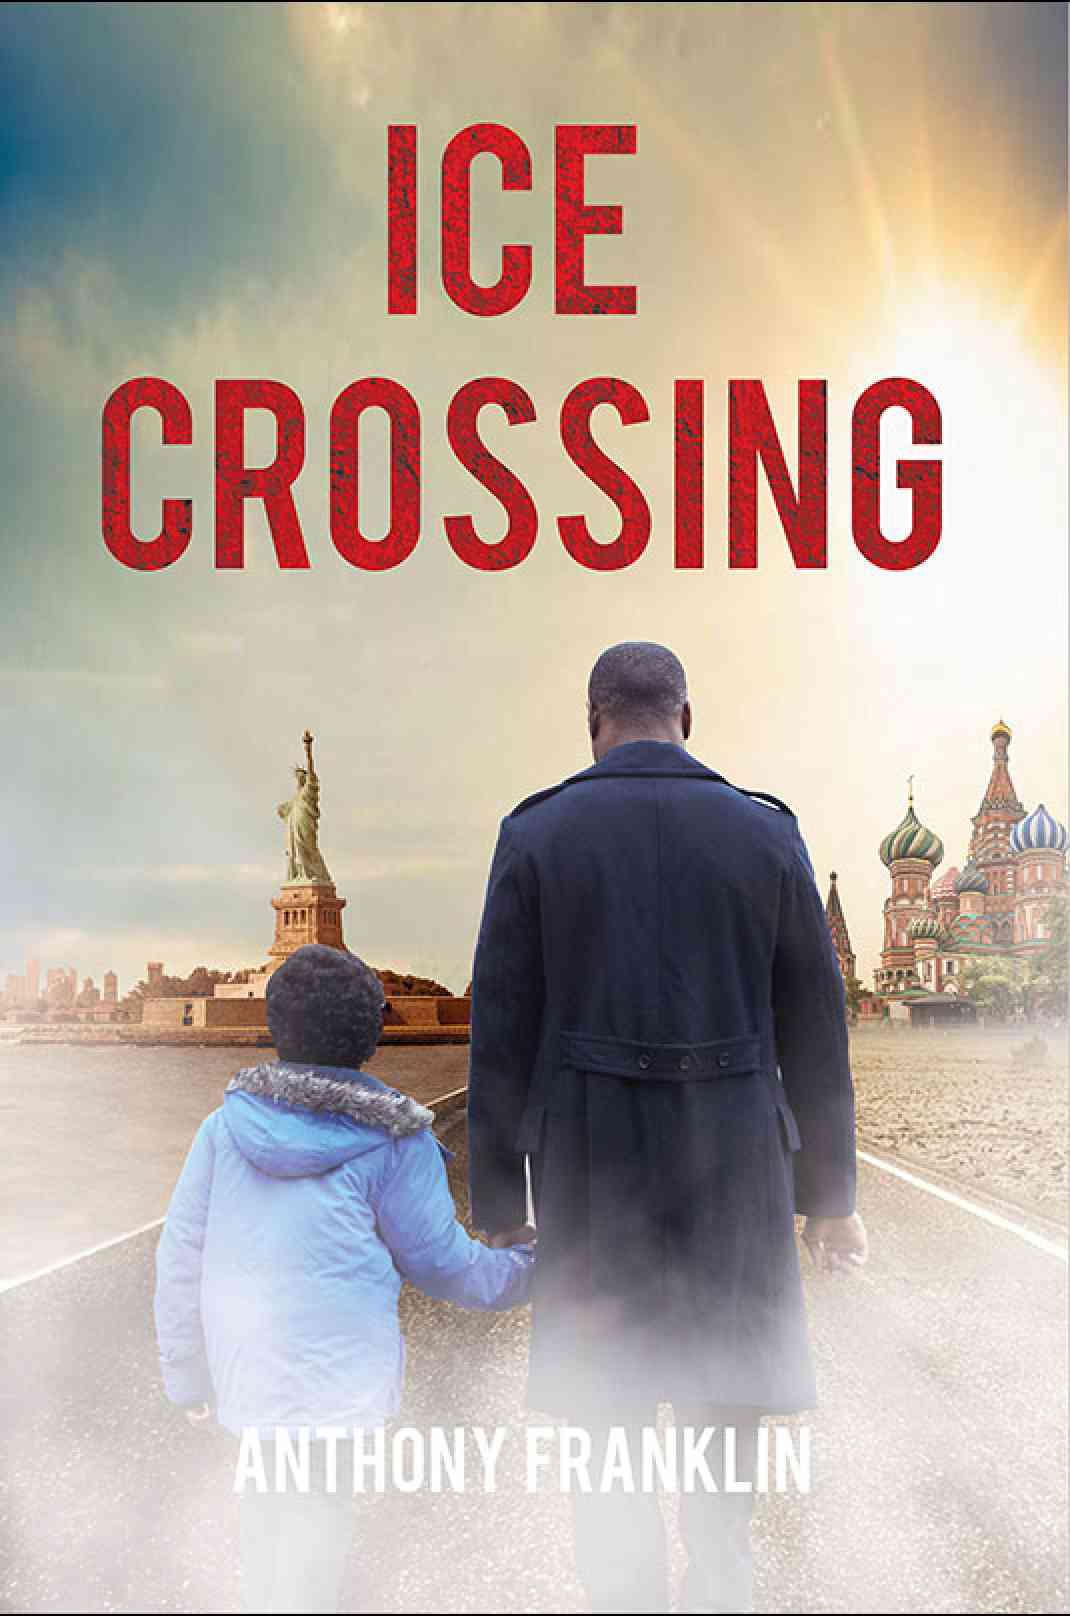 Anthony Franklin talks about his book ‘Ice Crossing’